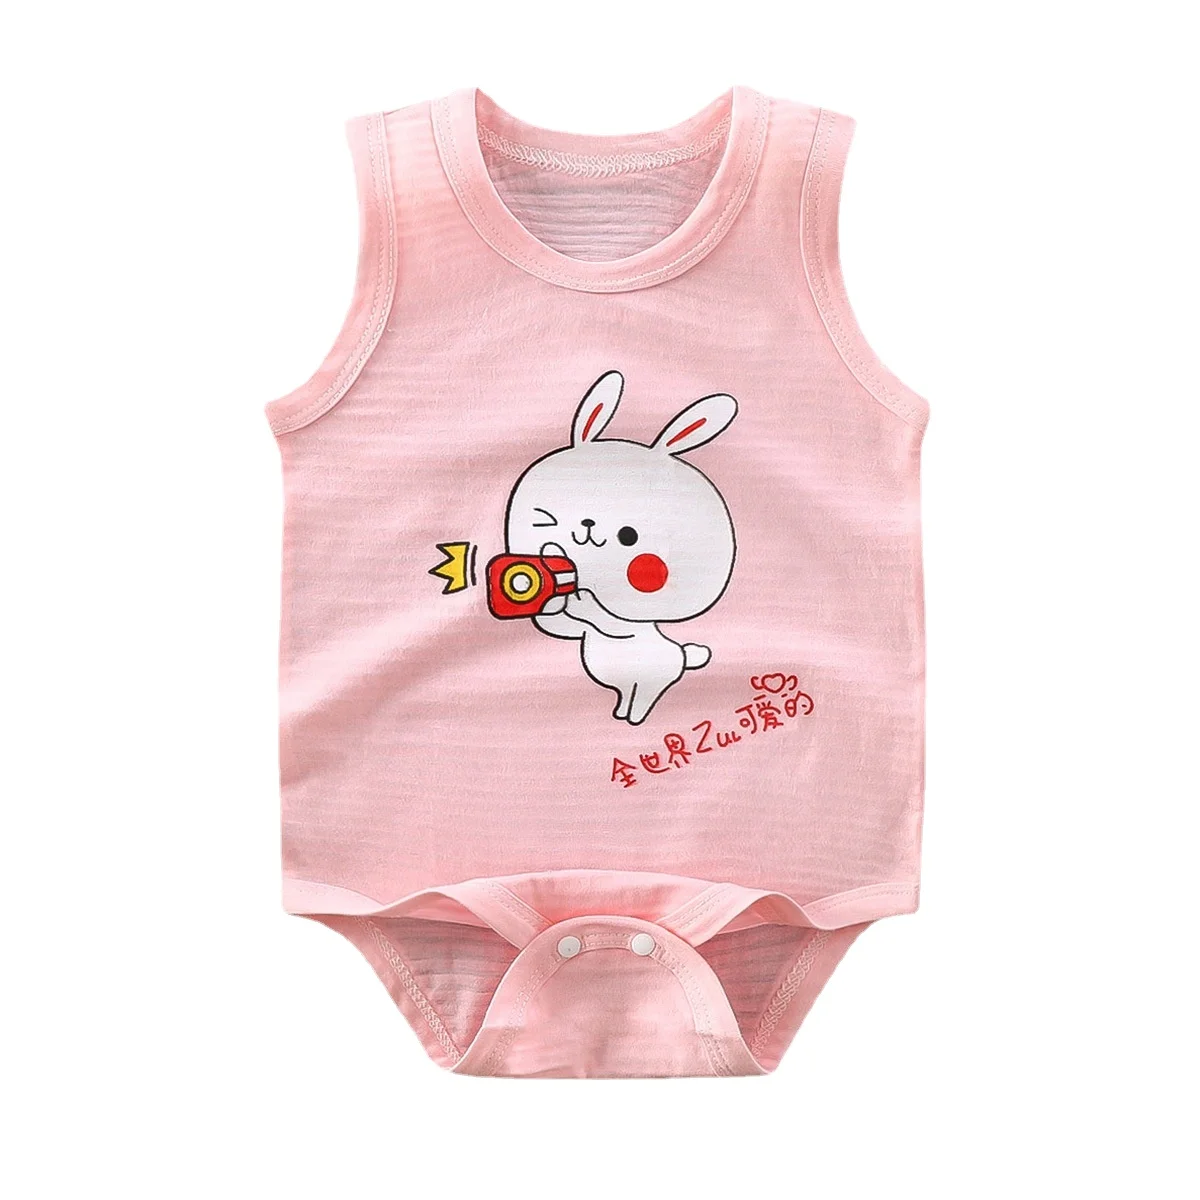 Newborn Baby Summer Rompers 100% Cotton Infant Baby Sleeveless Jumpsuit Cartoon Baby Boys Girls Clothes New Born Baby Clothes carters baby bodysuits	 Baby Rompers